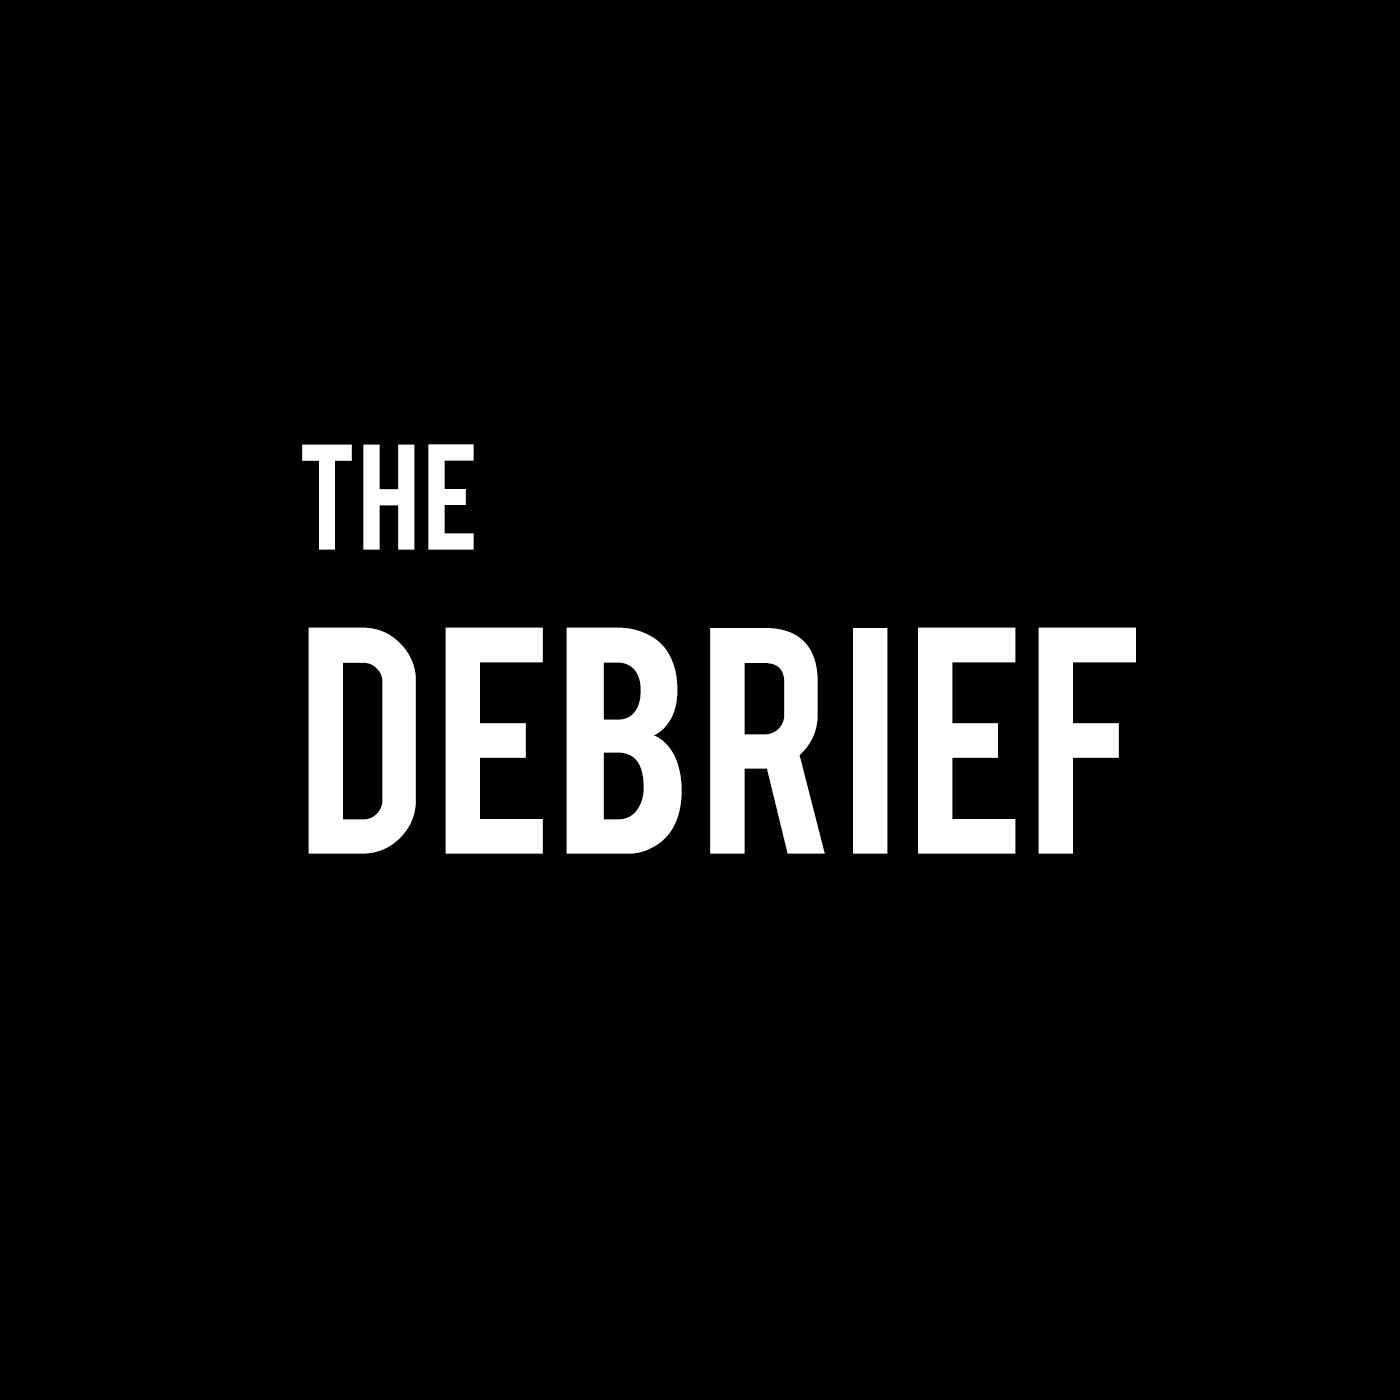 The Debrief w/ Jocko and Dave Berke: Your Boss Thinks You Don't Show Enough Passion In Your Leadership